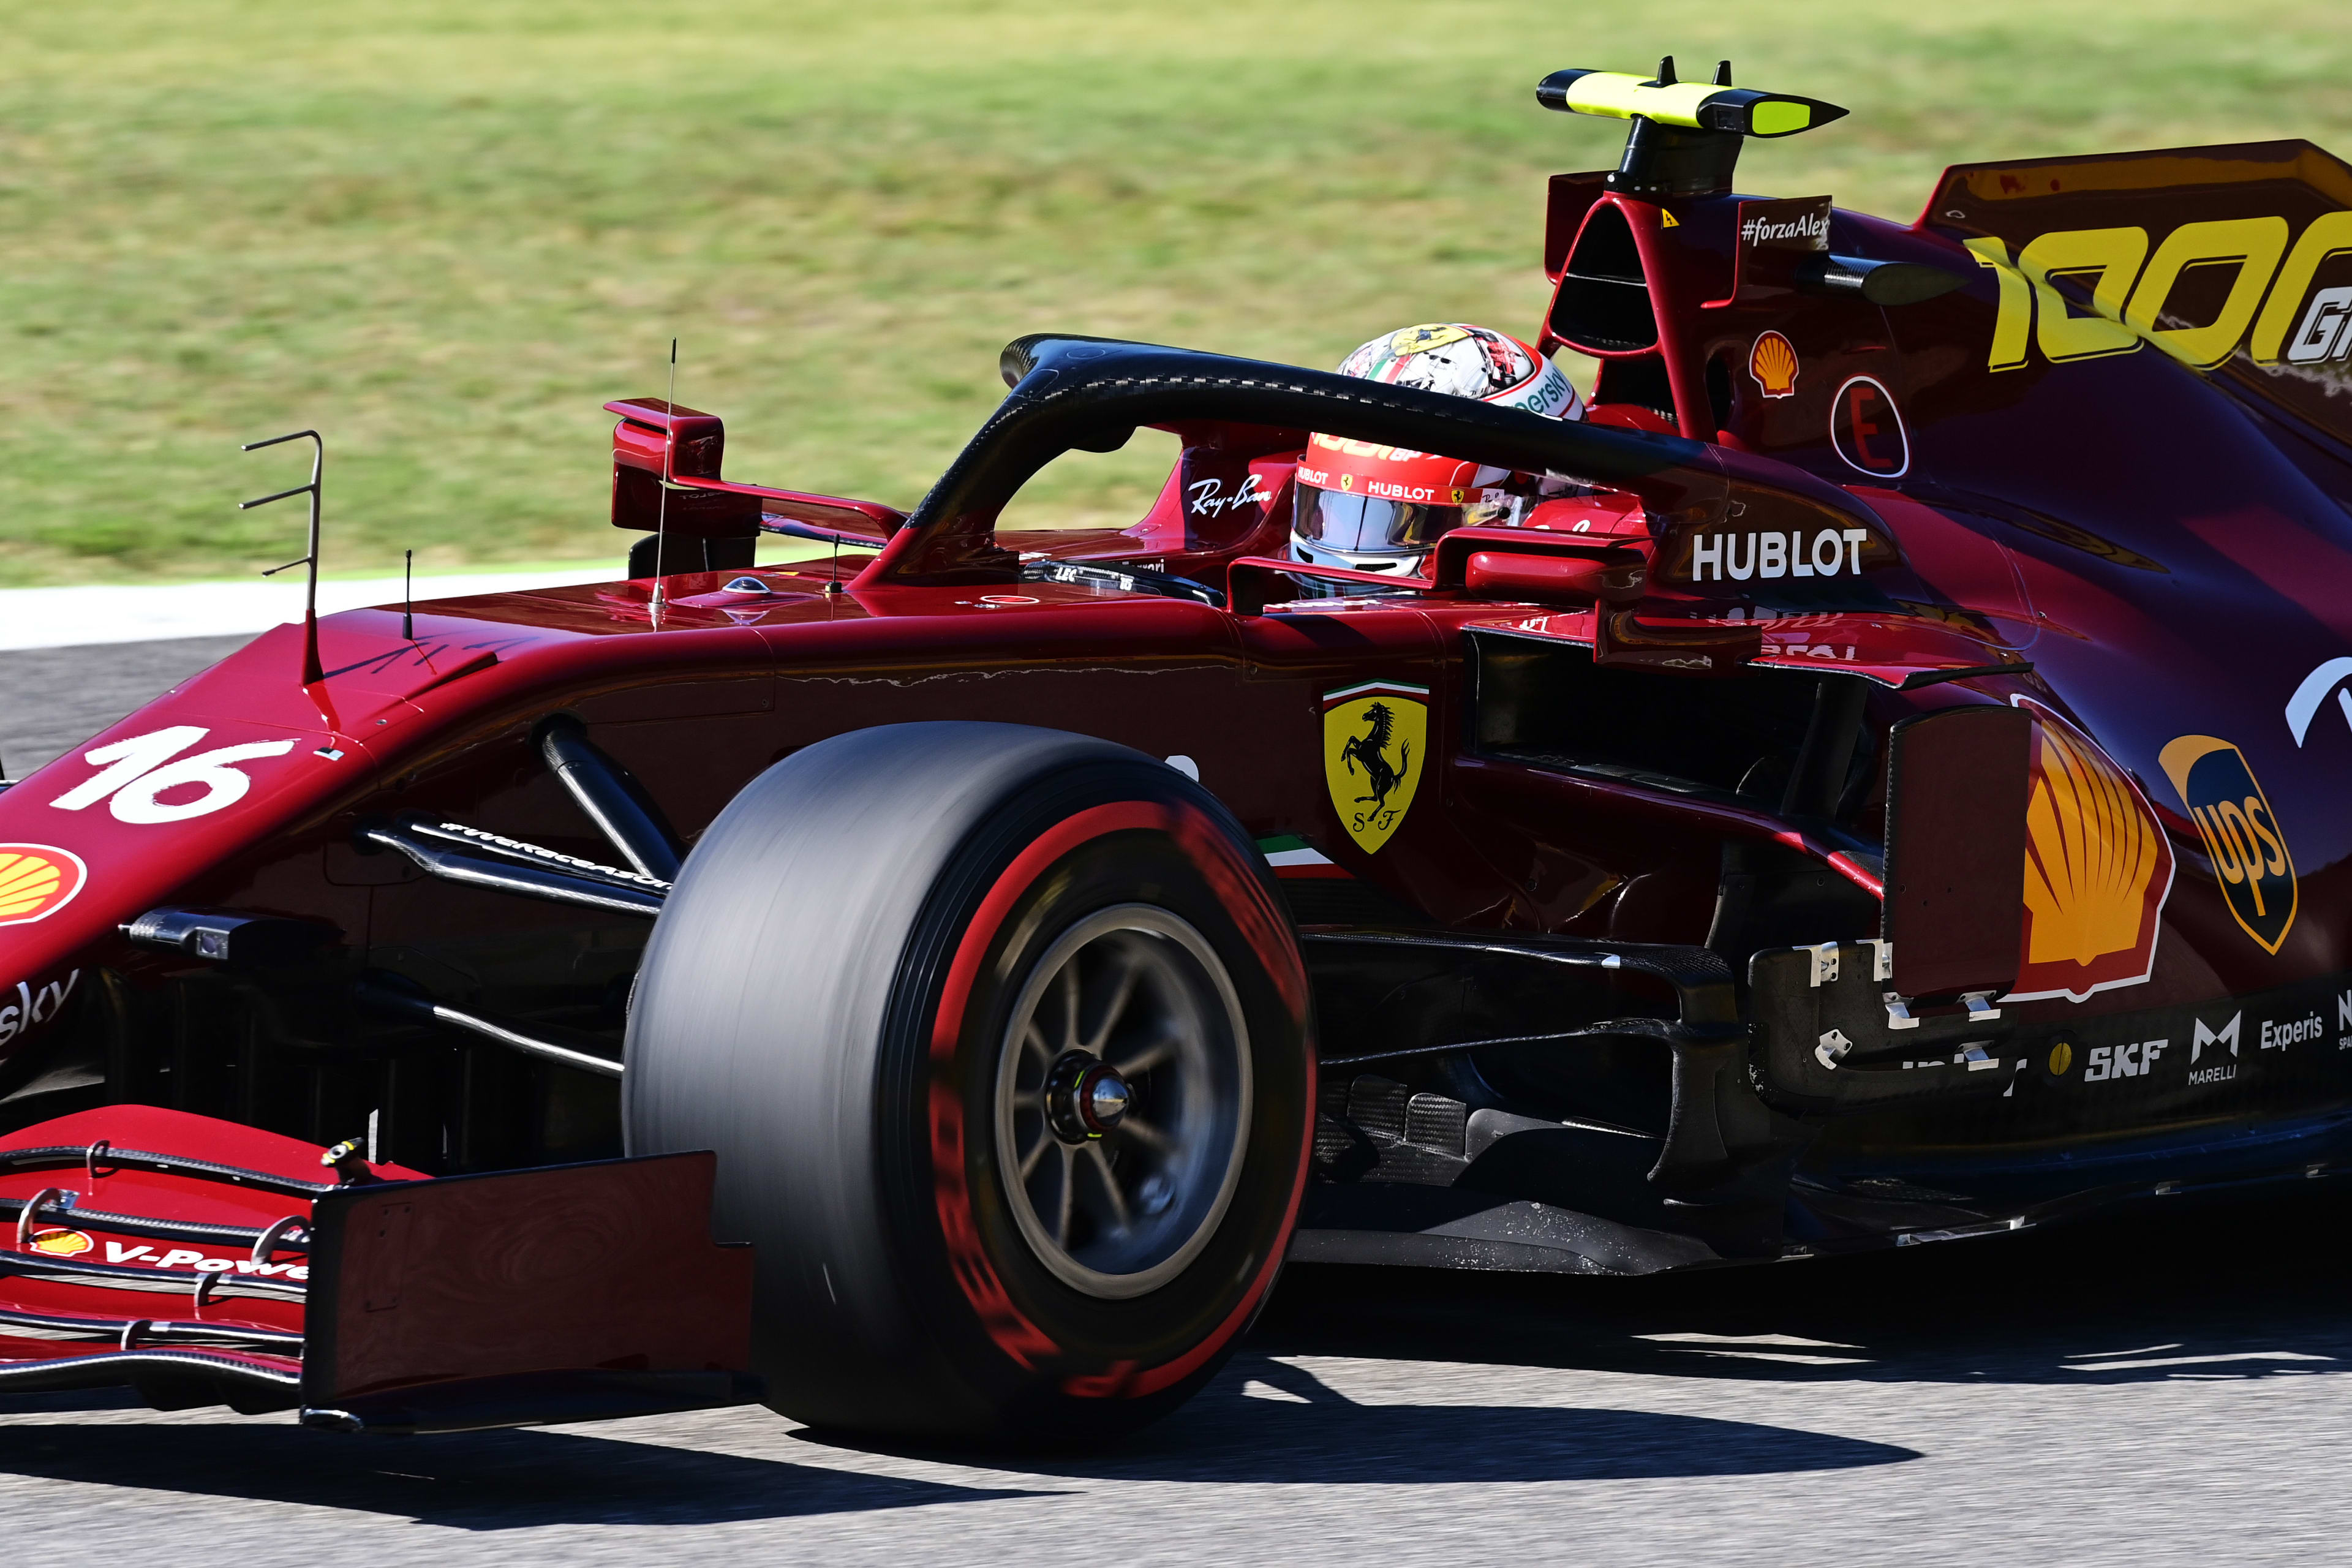 Fifth above our expectations says Leclerc after Ferraris first Q3 appearance since Spain Formula 1®